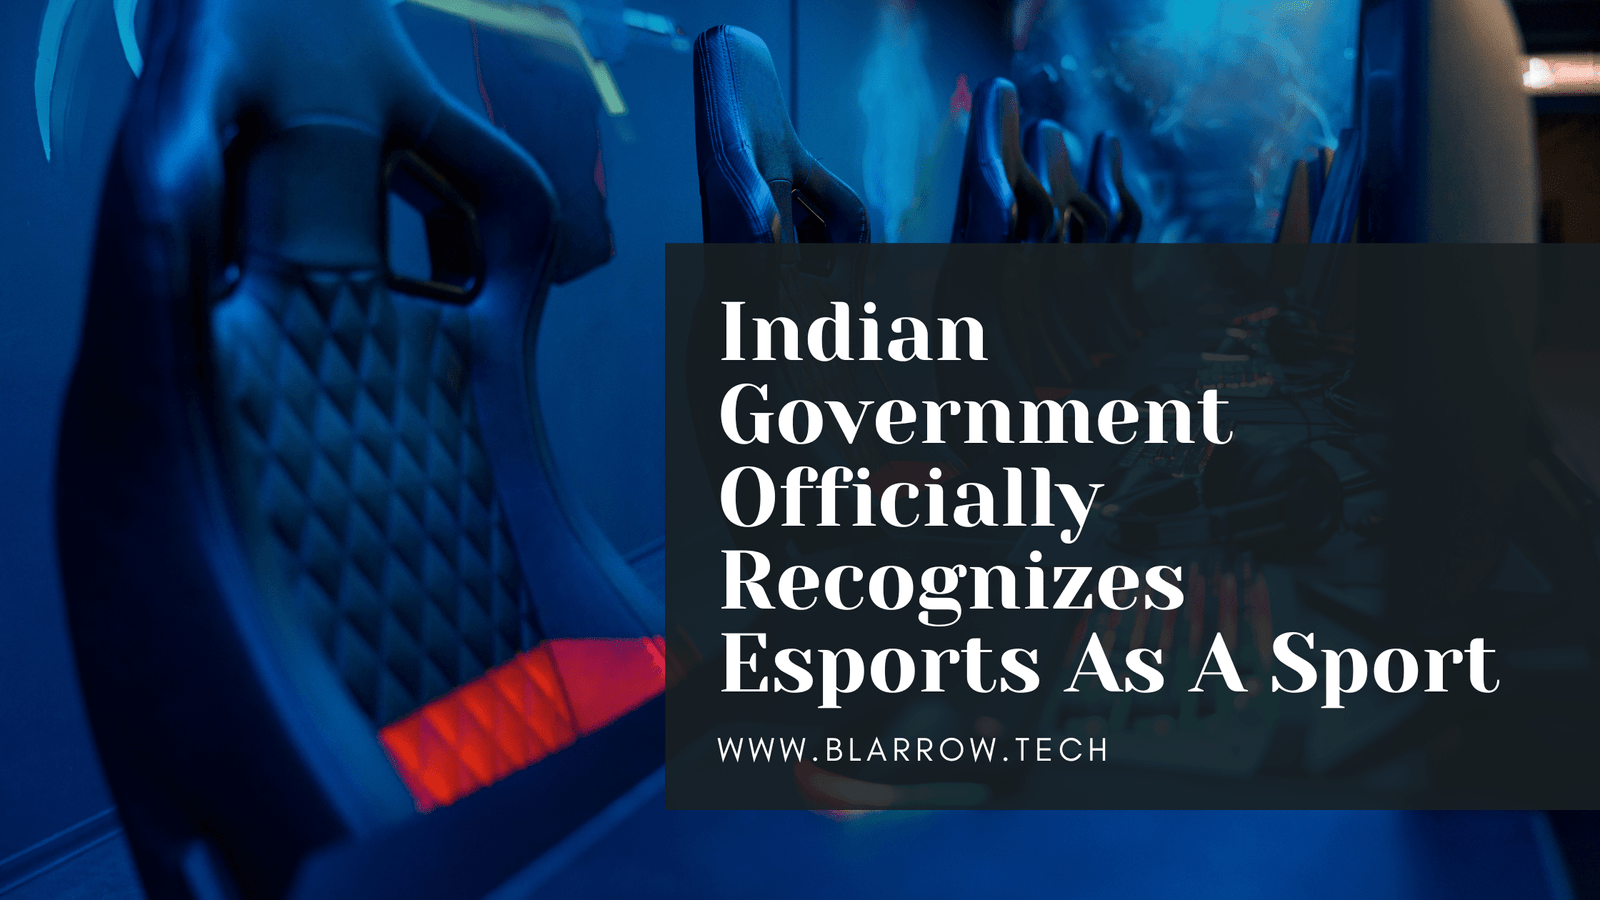 Indian Government Officially Recognizes Esports As A Sport